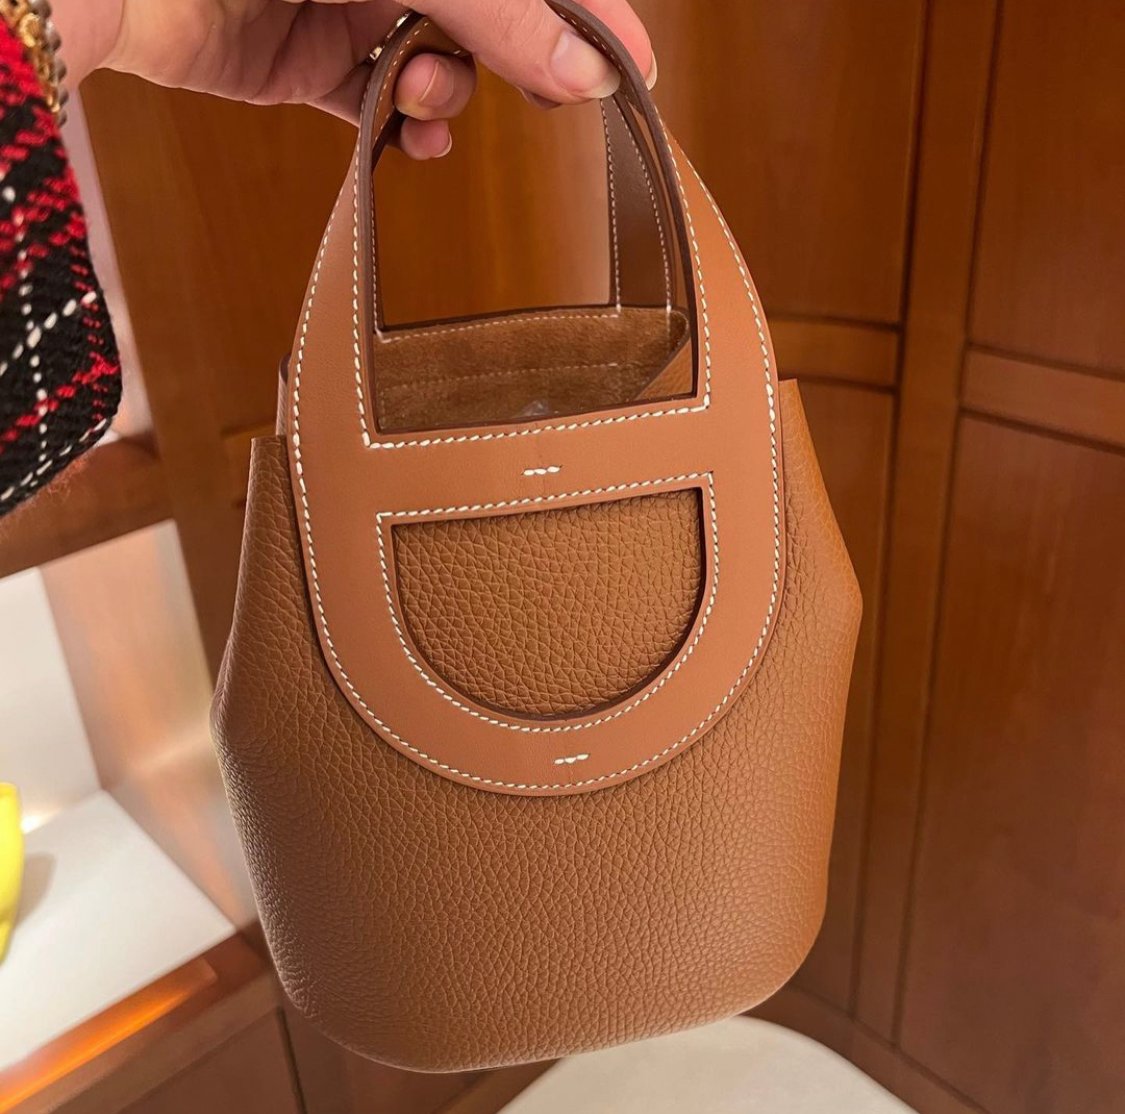 New To Hermès? Here Are All The Most Notable Bags From The Brand in 2023